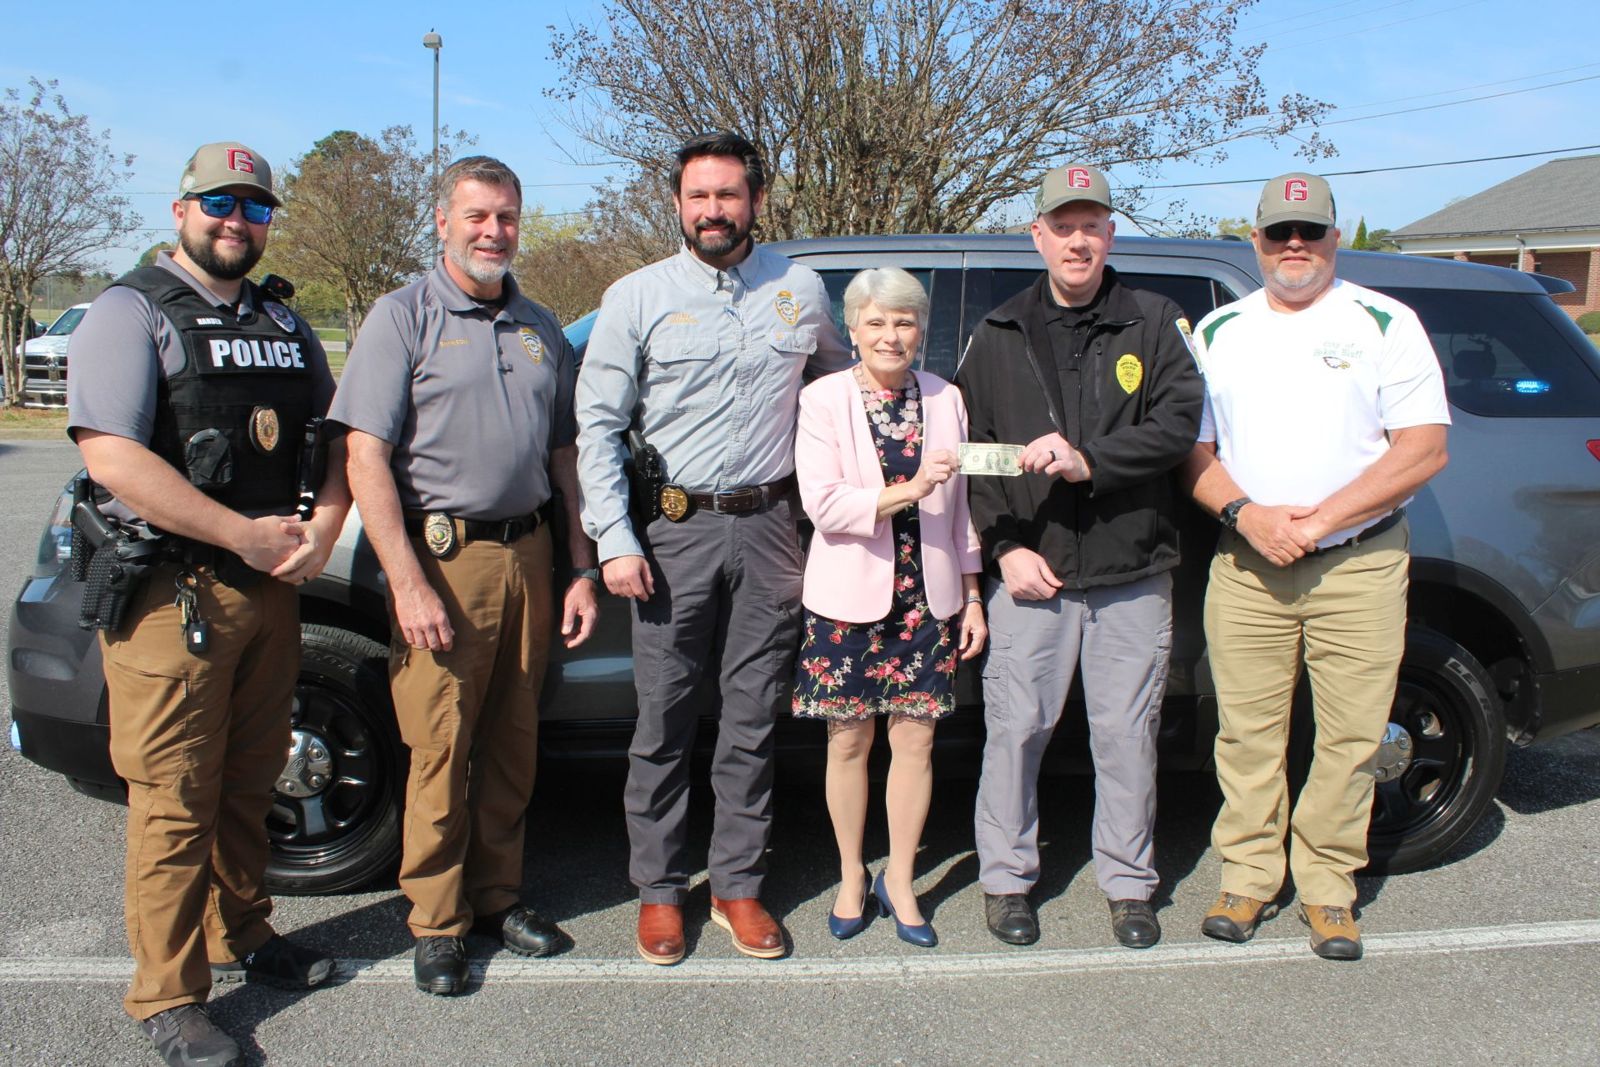 Dr. Kathy Murphy, president of Gadsden State, presents a dollar to Hokes Bluff Chief of Police Tyler Roe in exchange for a fully-equipped Ford Explorer. Joining them are, from left, Sgt. Colton Harden, Sgt. David Bankson and Chief Jay Freeman, all of the Gadsden State Police and Public Safety Department, and Hokes Bluff Mayor Scott Reeves.